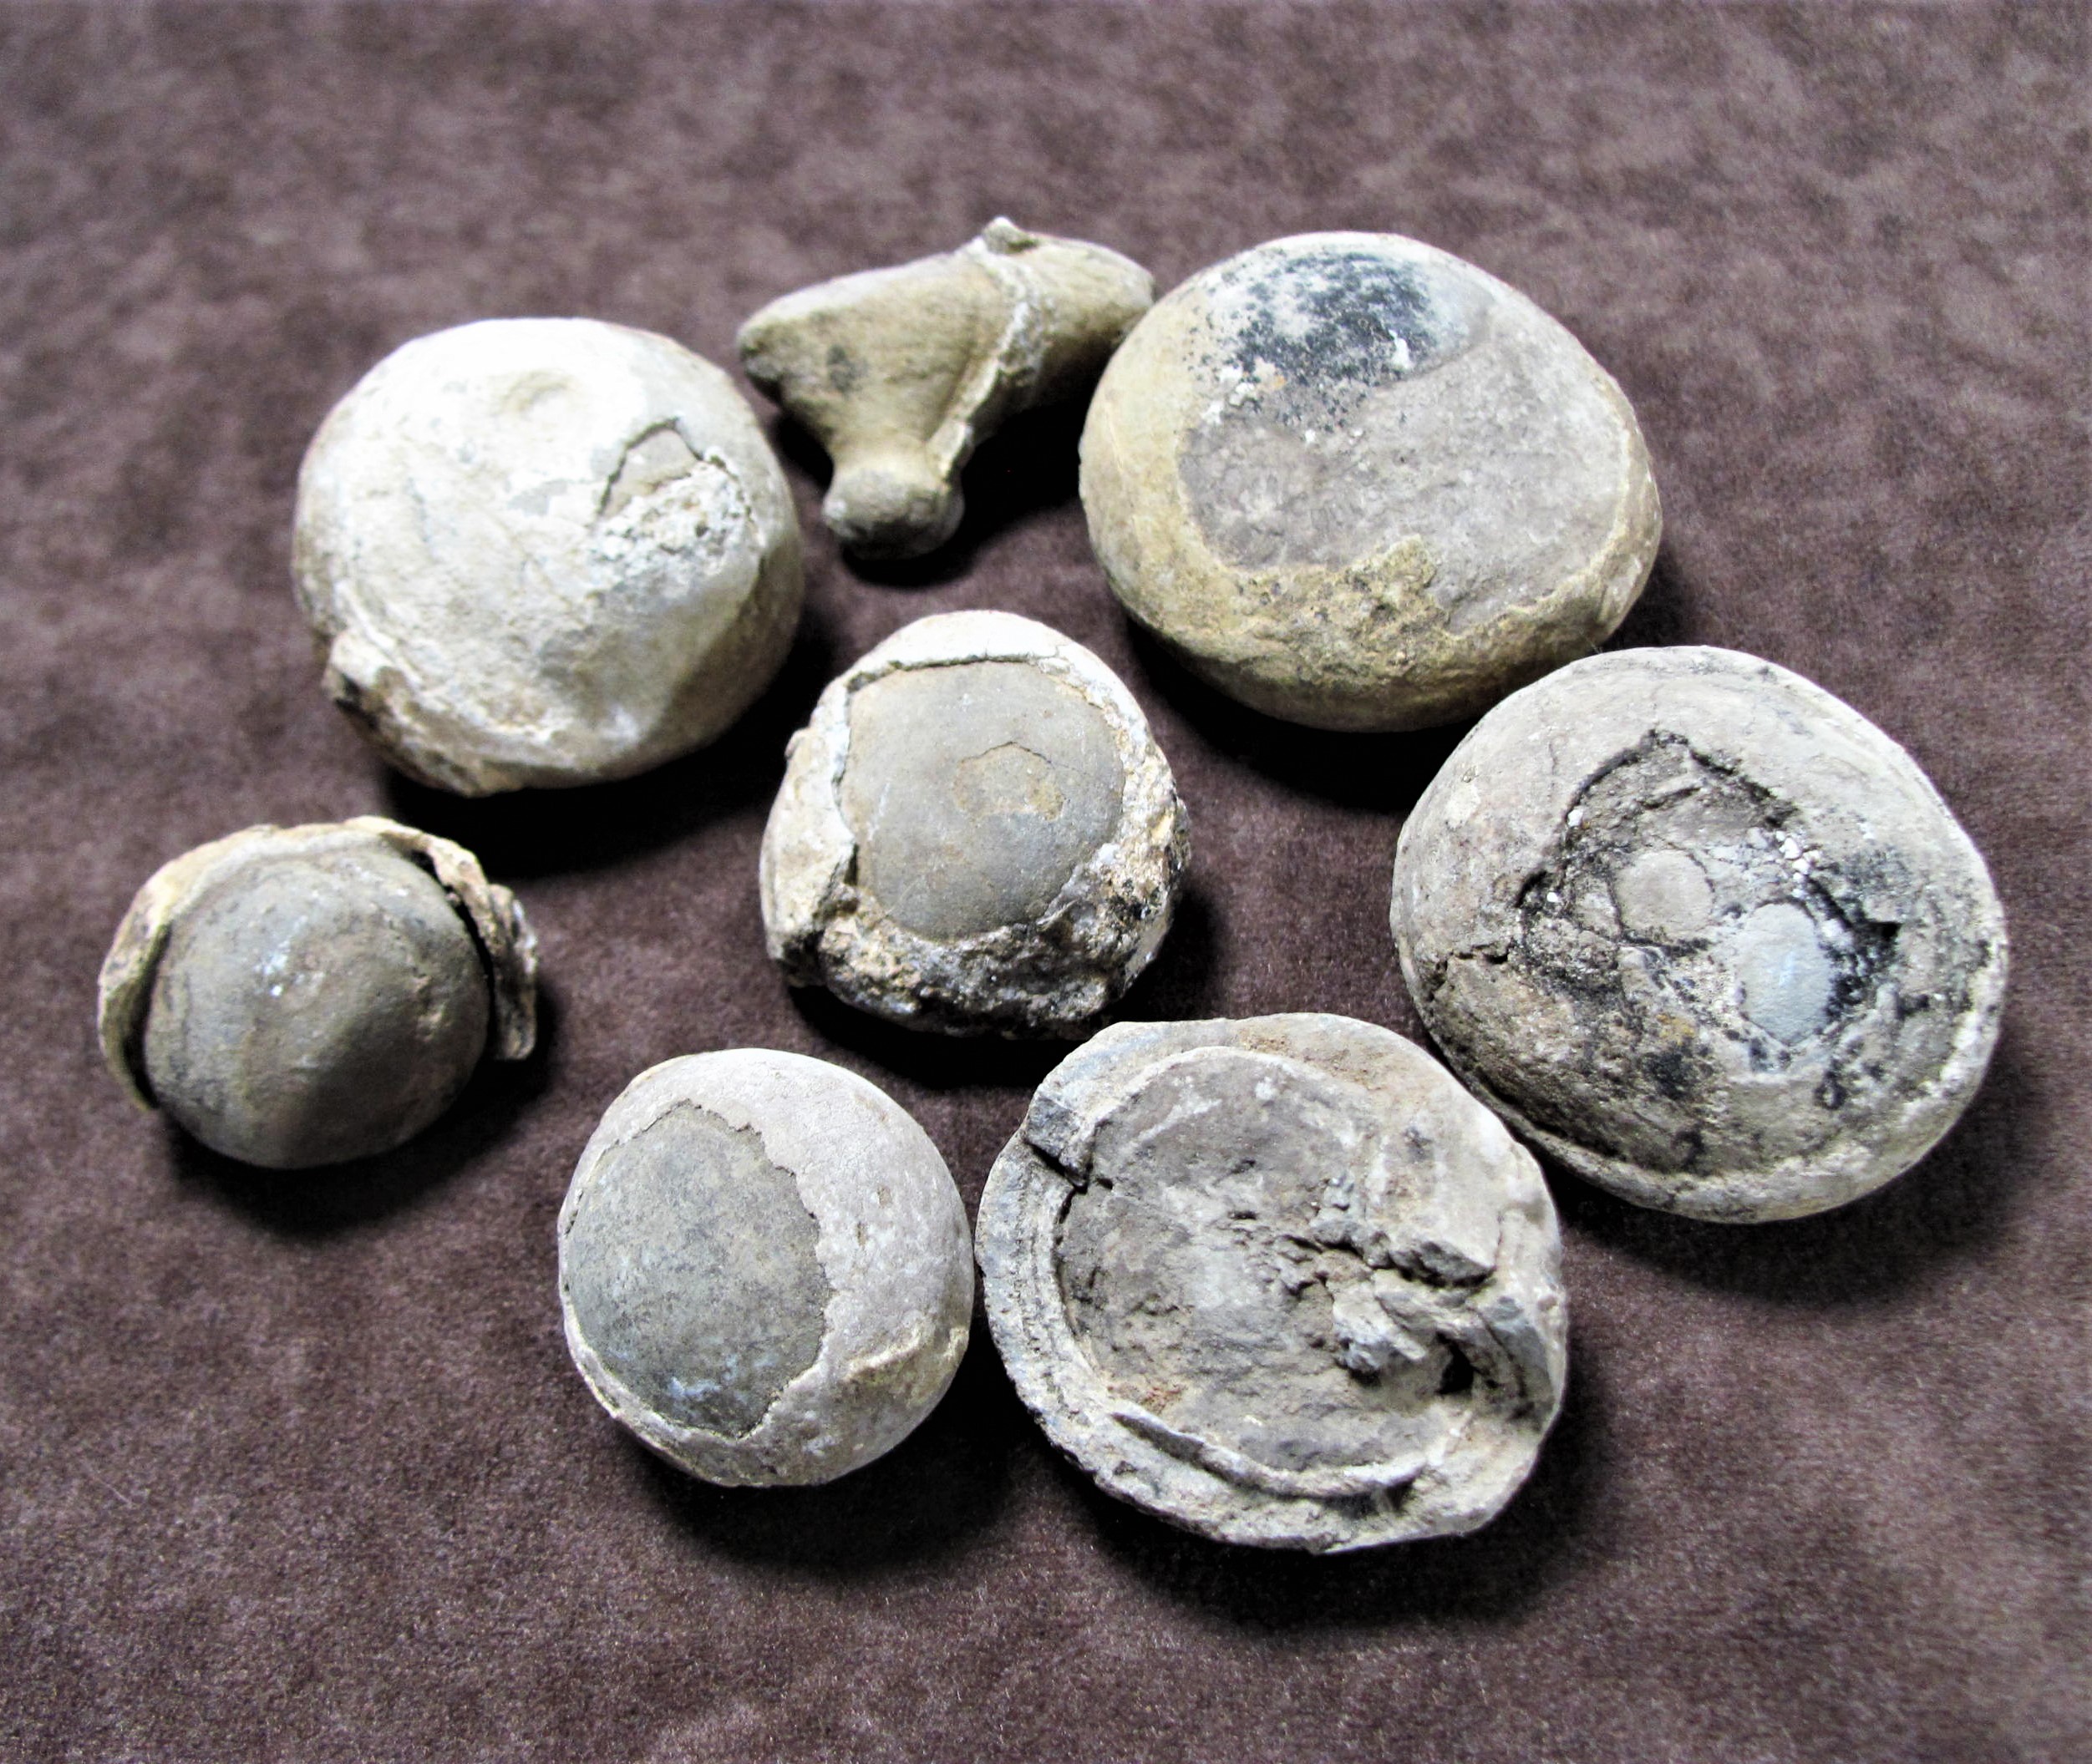 Concretion or Fossil Egg - Fossil ID - The Fossil Forum